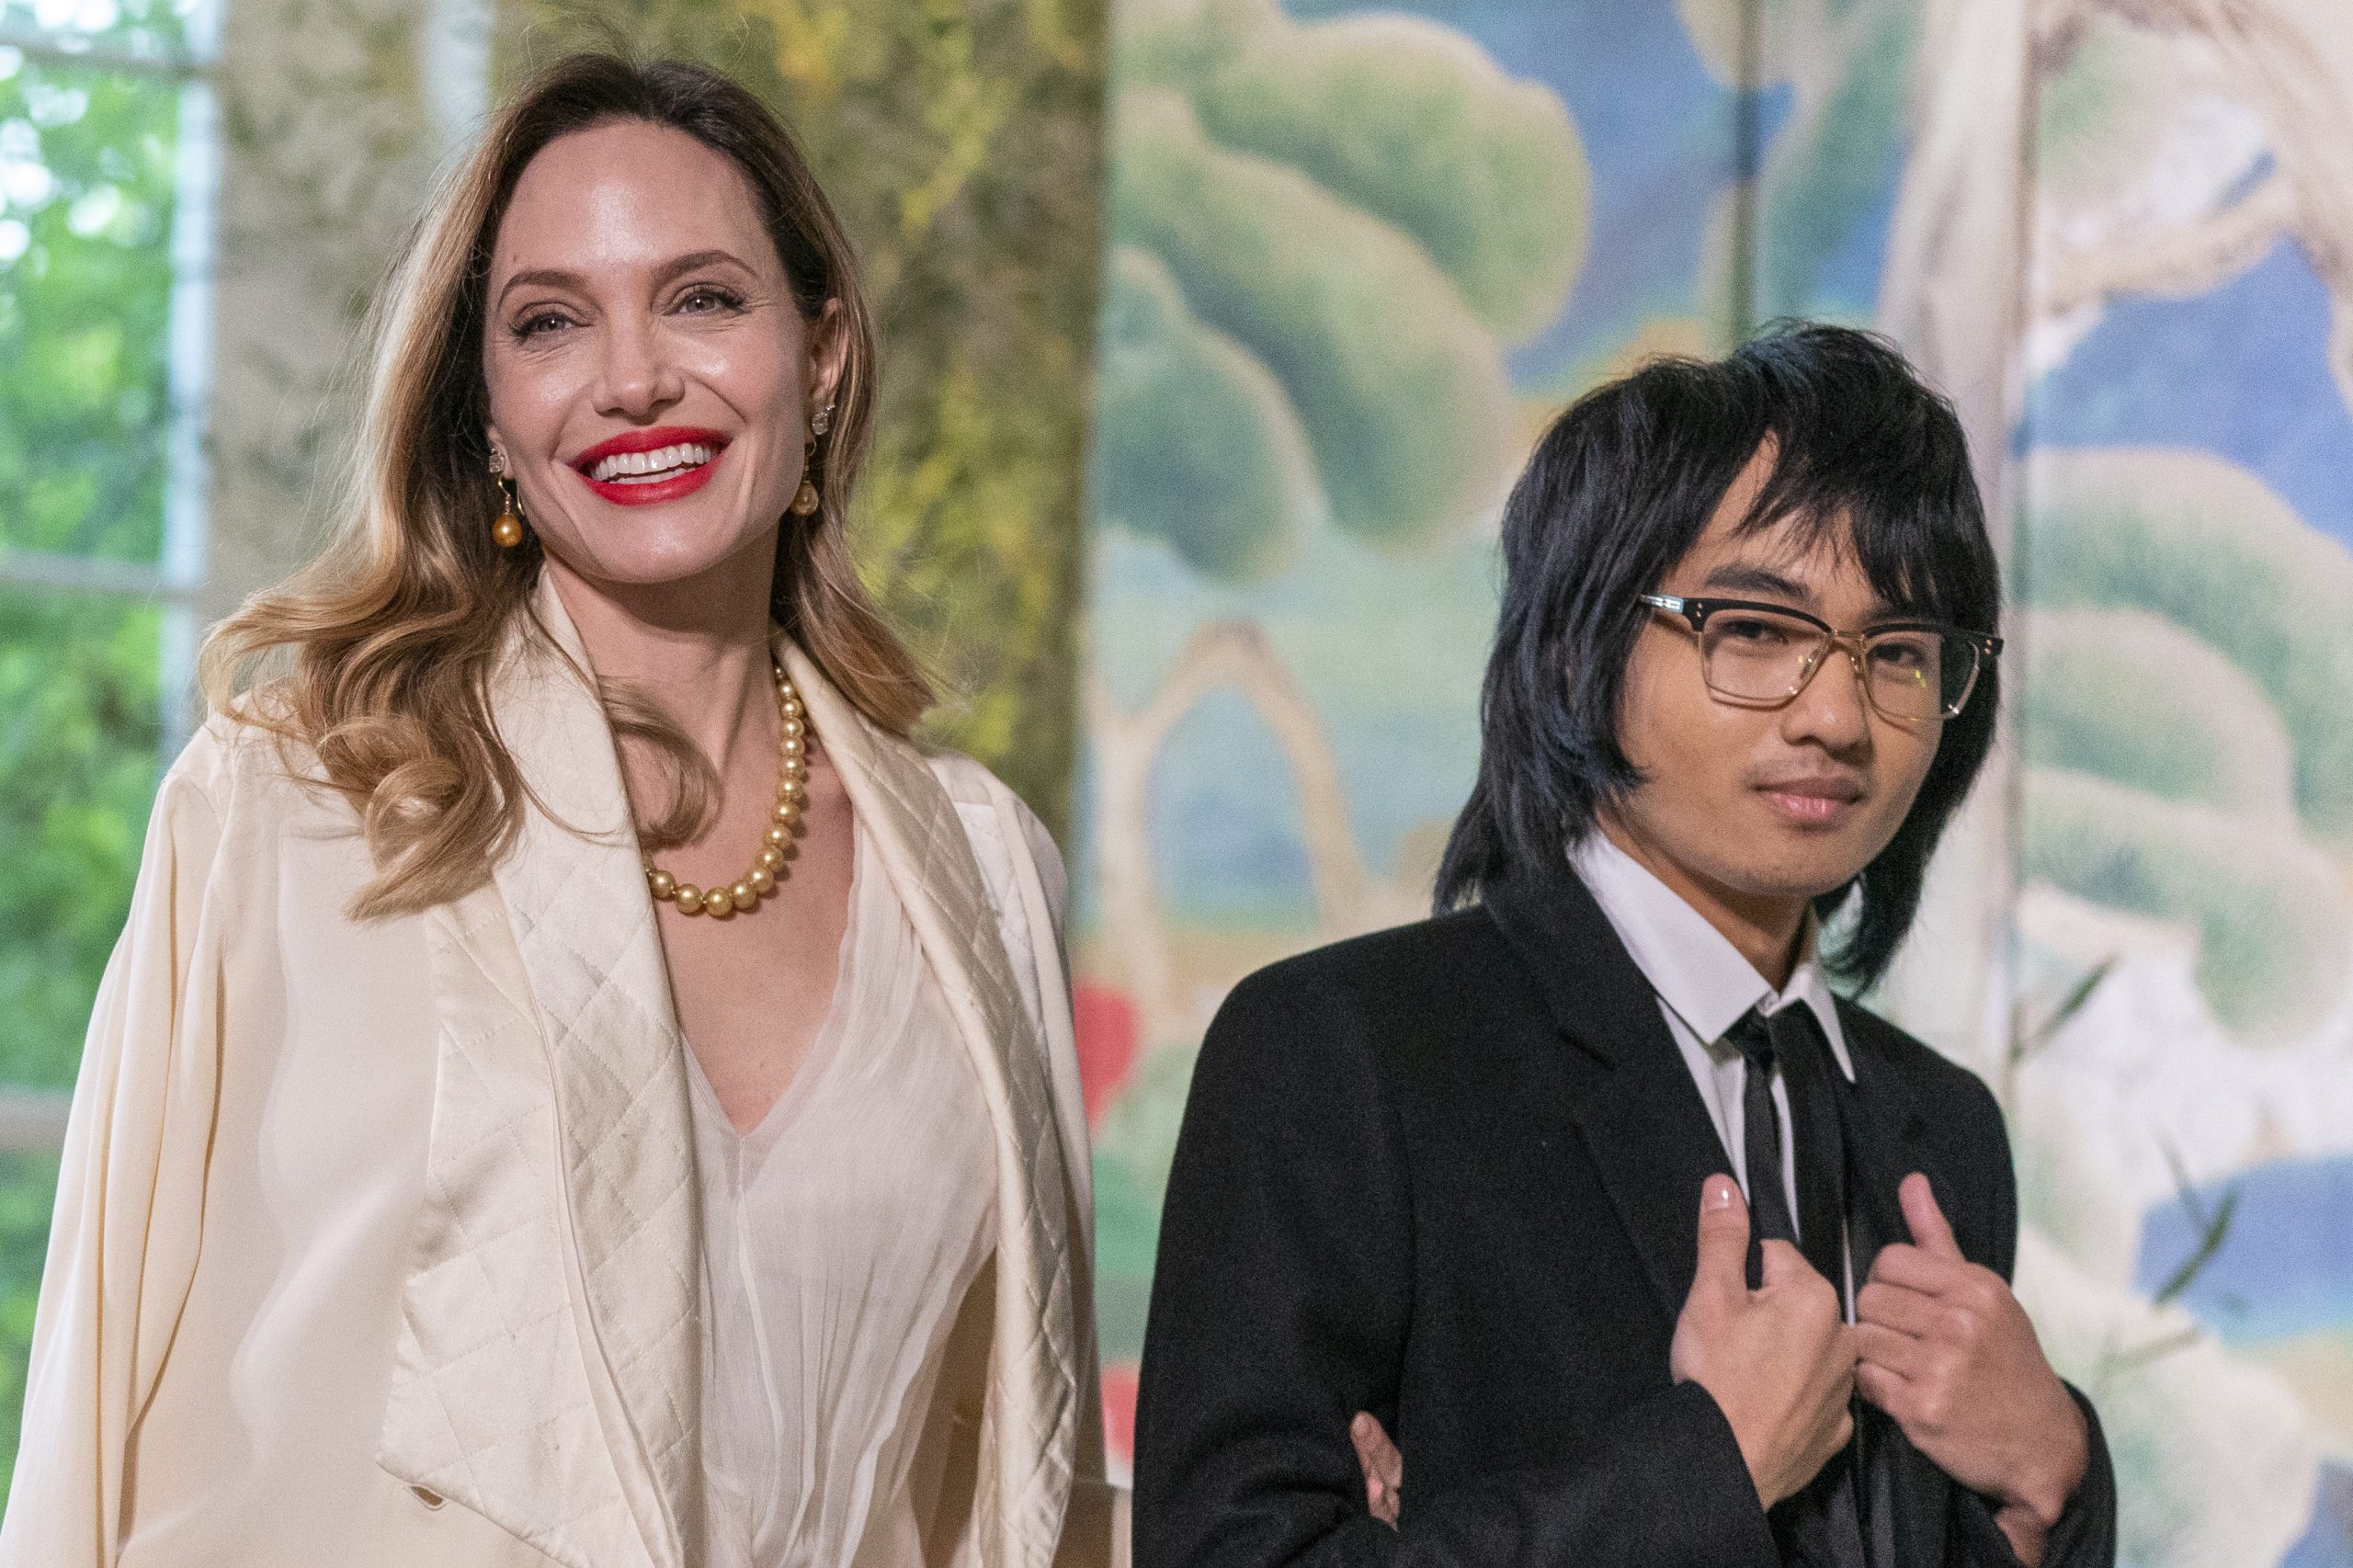 Angelina Jolie and Maddox Jolie-Pitt arrive for the State Dinner with President Joe Biden and the South Korea's President Yoon Suk Yeol at the White House, Wednesday, April 26, 2023, in Washington. (AP Photo/Alex Brandon)